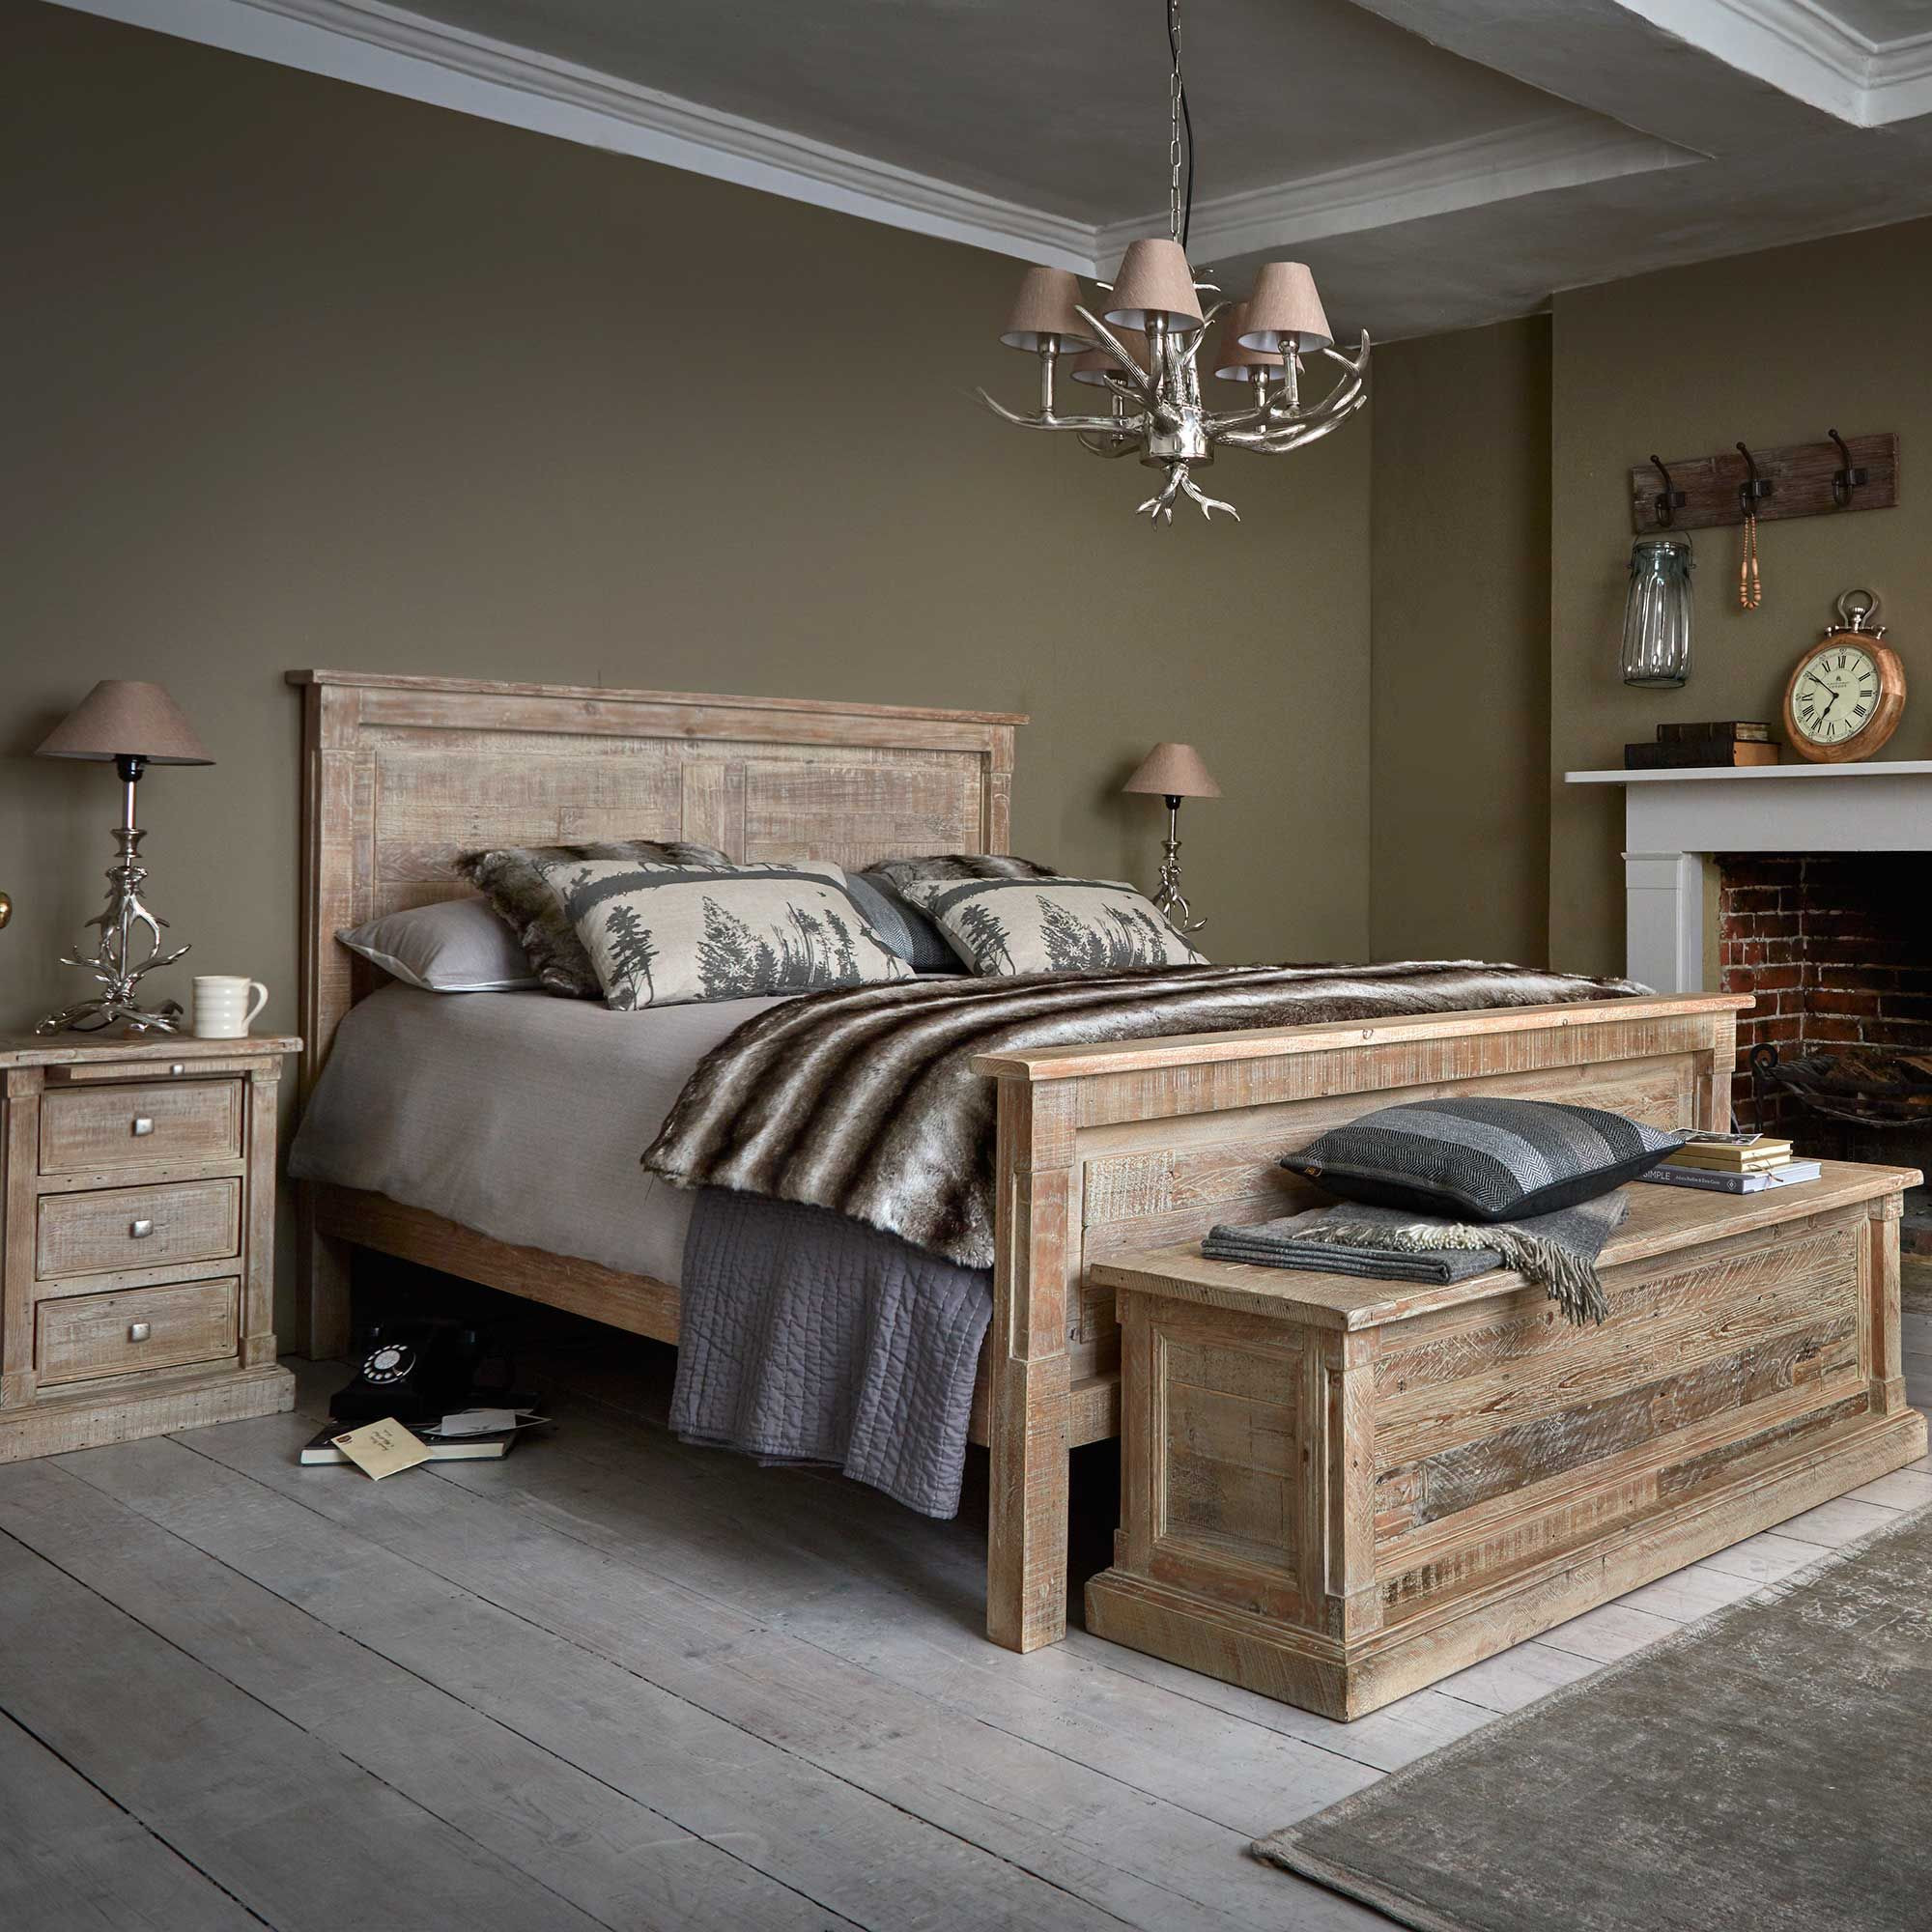 Rustic Wood Bedroom Furniture
 The Austen Bed Frame is made from reclaimed wood with a